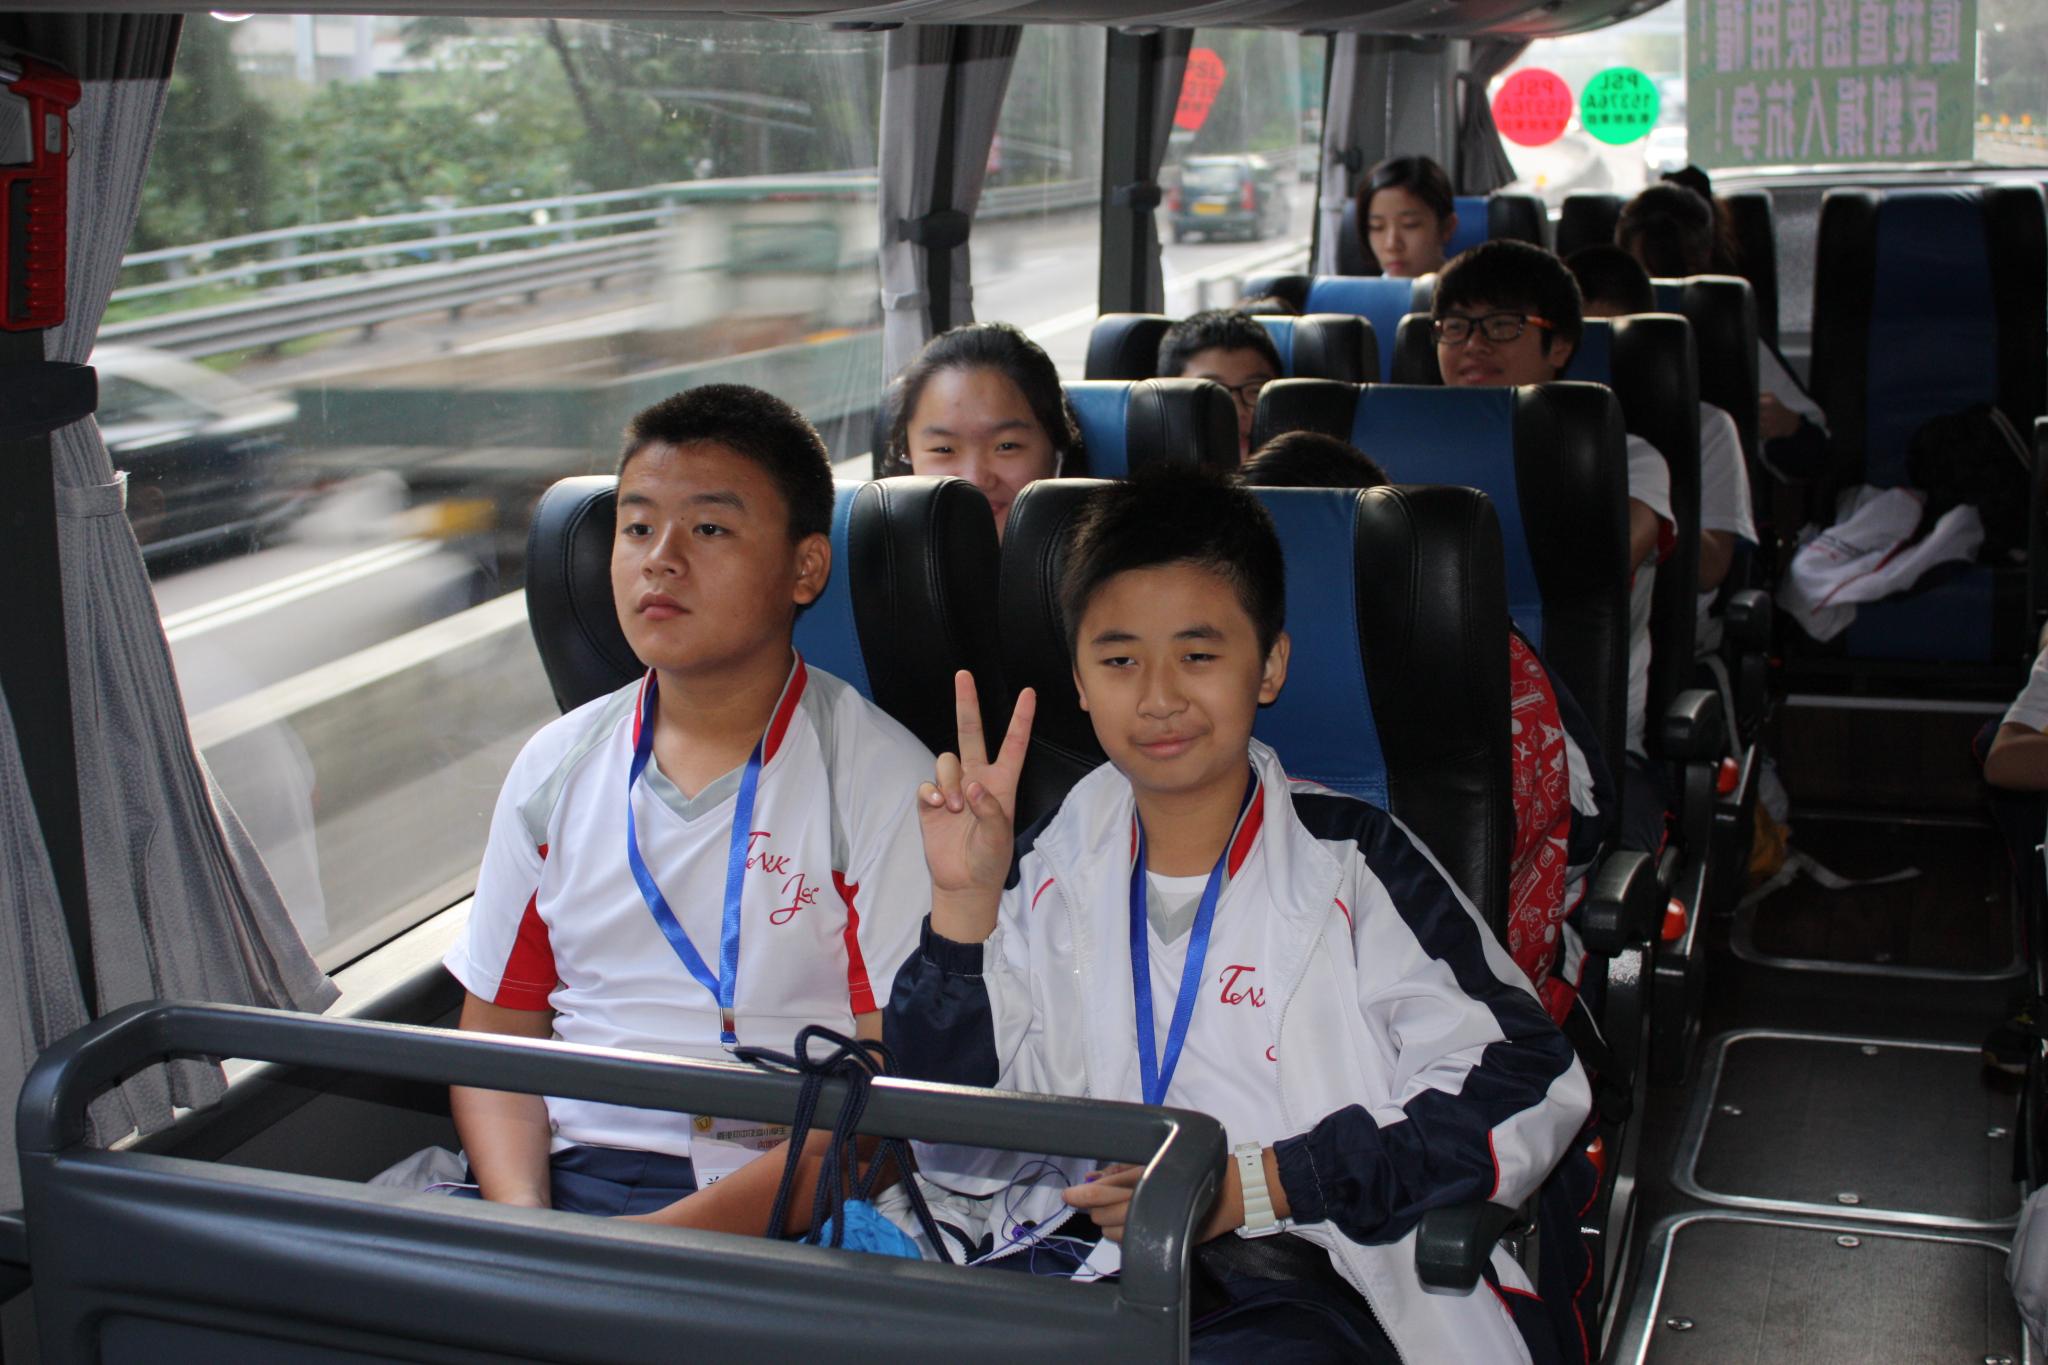 Students on the bus keen to set off